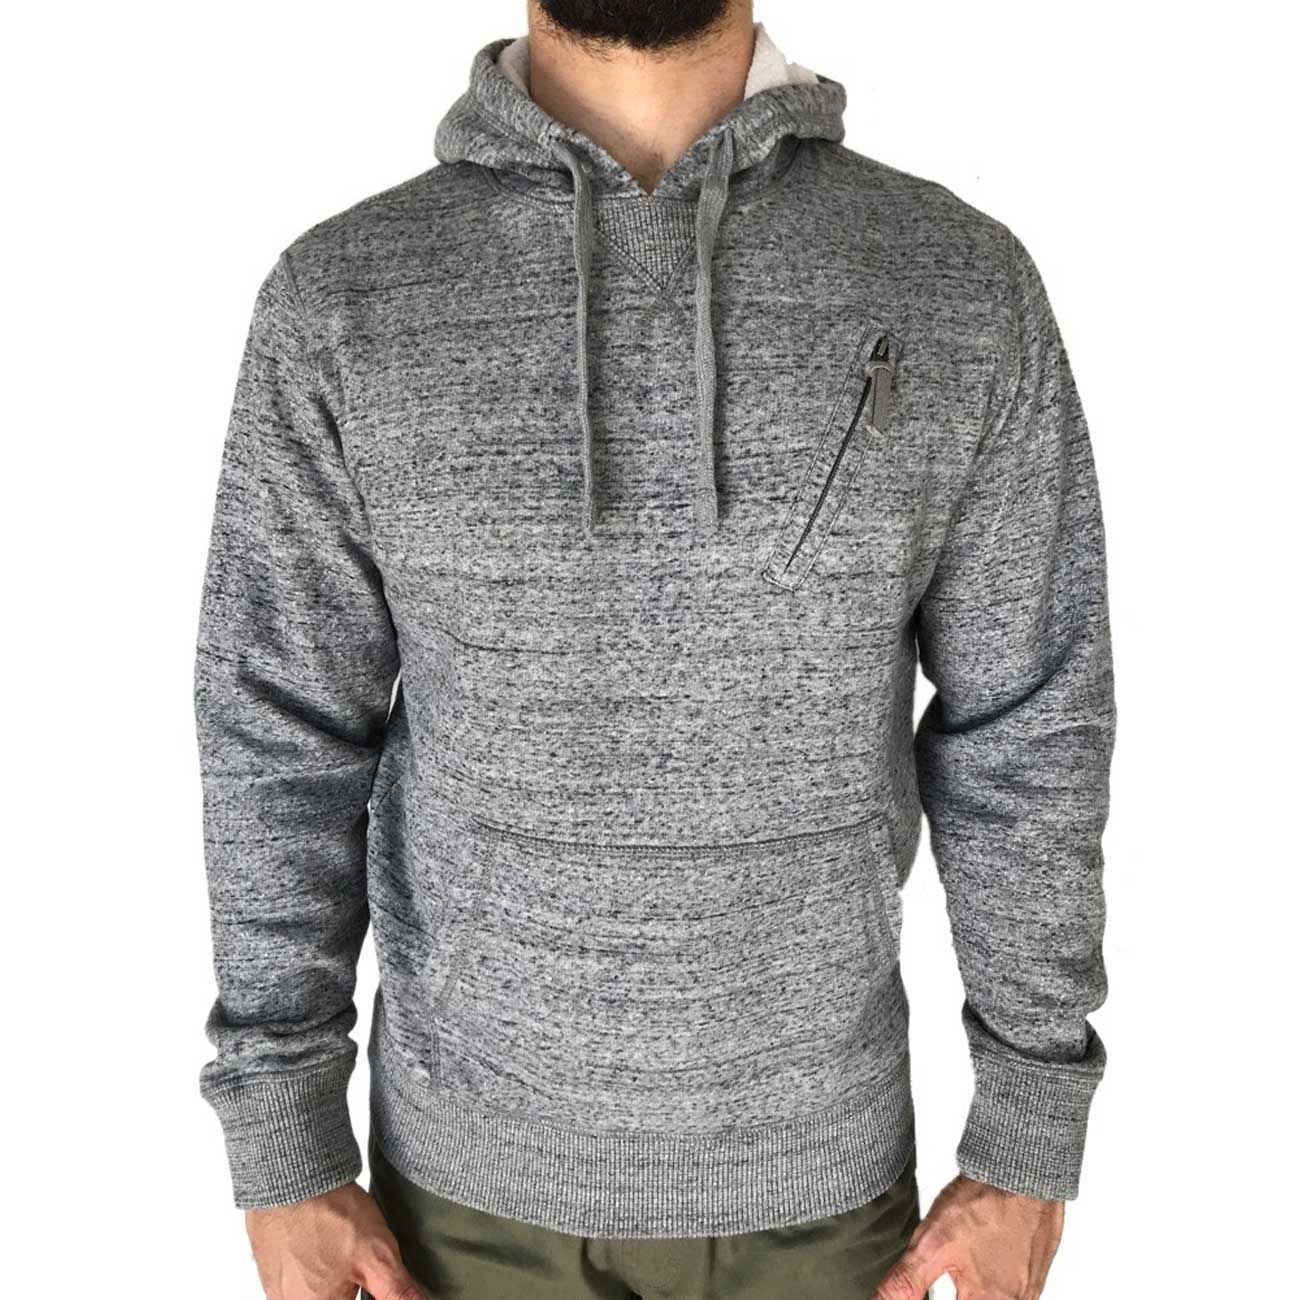 Stylish and Comfortable Knit Hoodie by Hawke & Co. - Classic Fit, Soft Fabric, Durable Construction